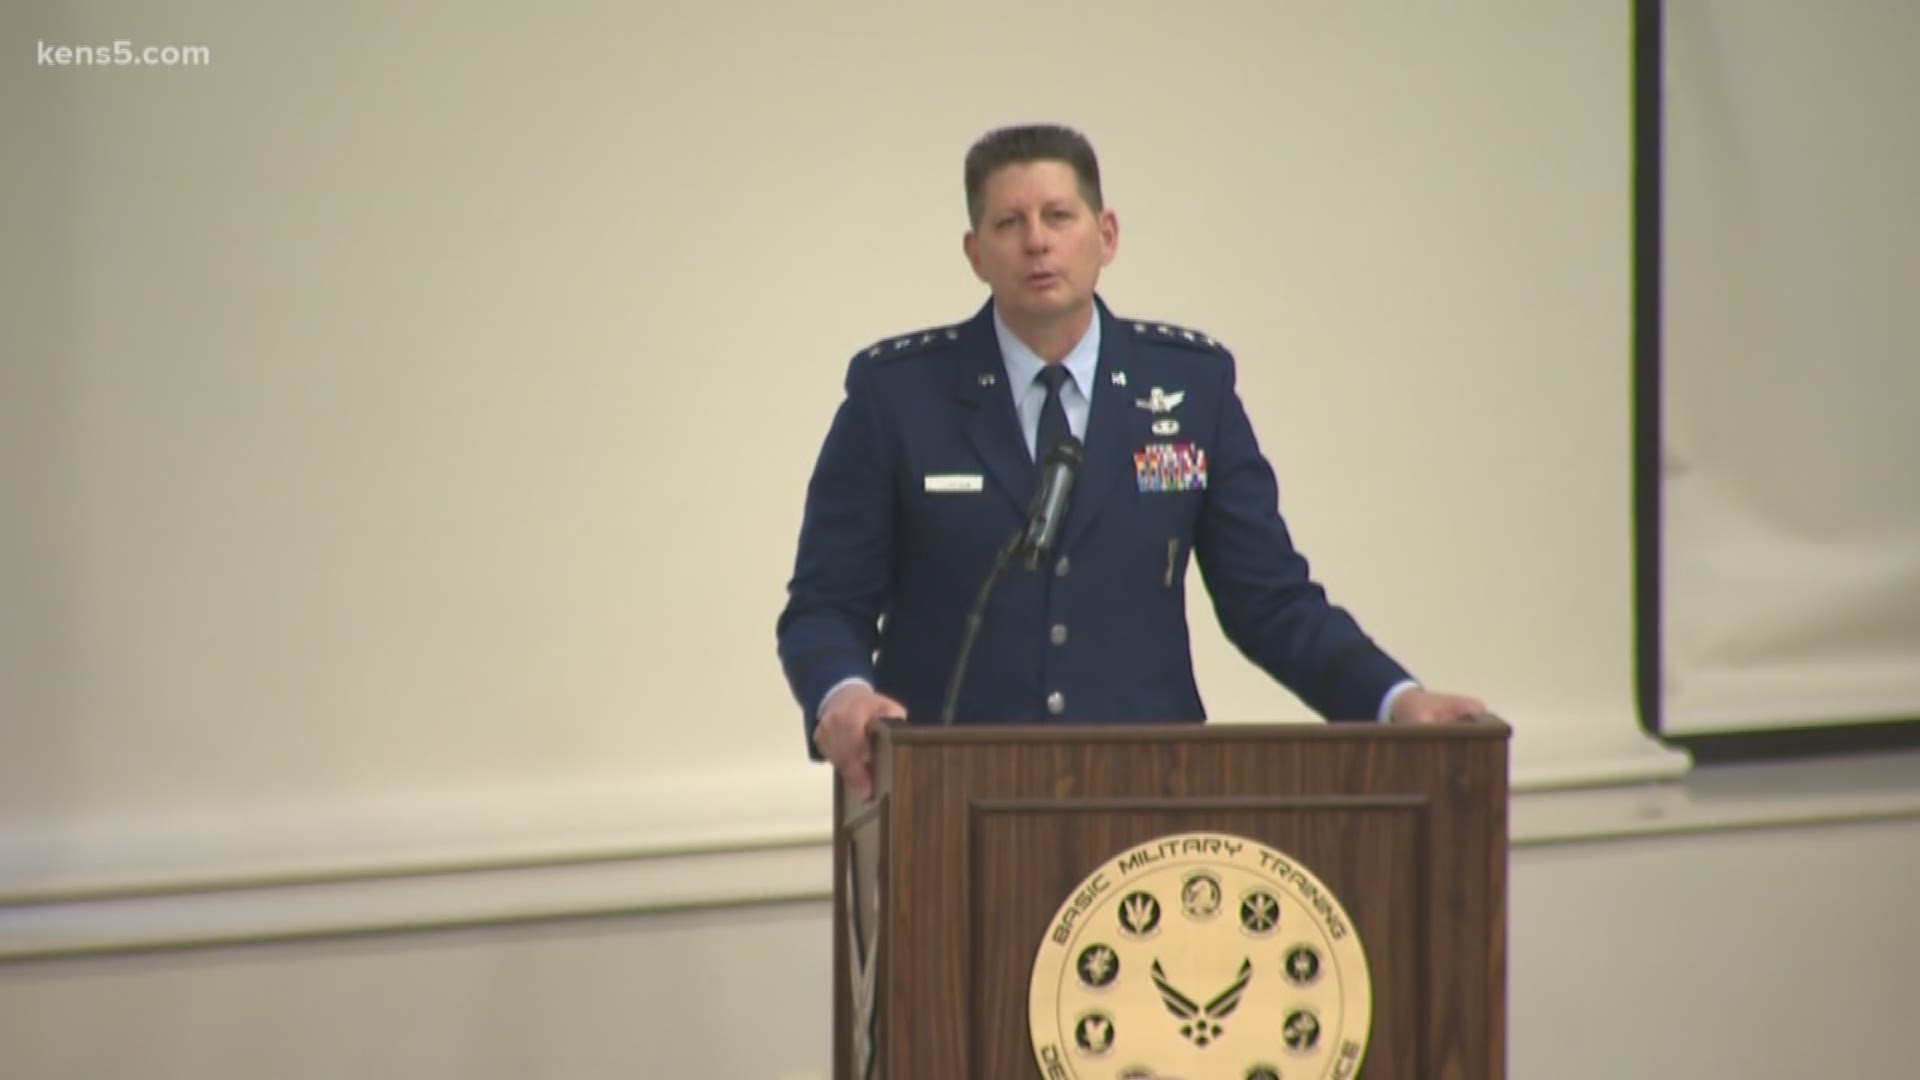 850 airmen graduated on Friday, but in efforts to mitigate the spread of coronavirus, their families were limited to watching a stream of the ceremony.